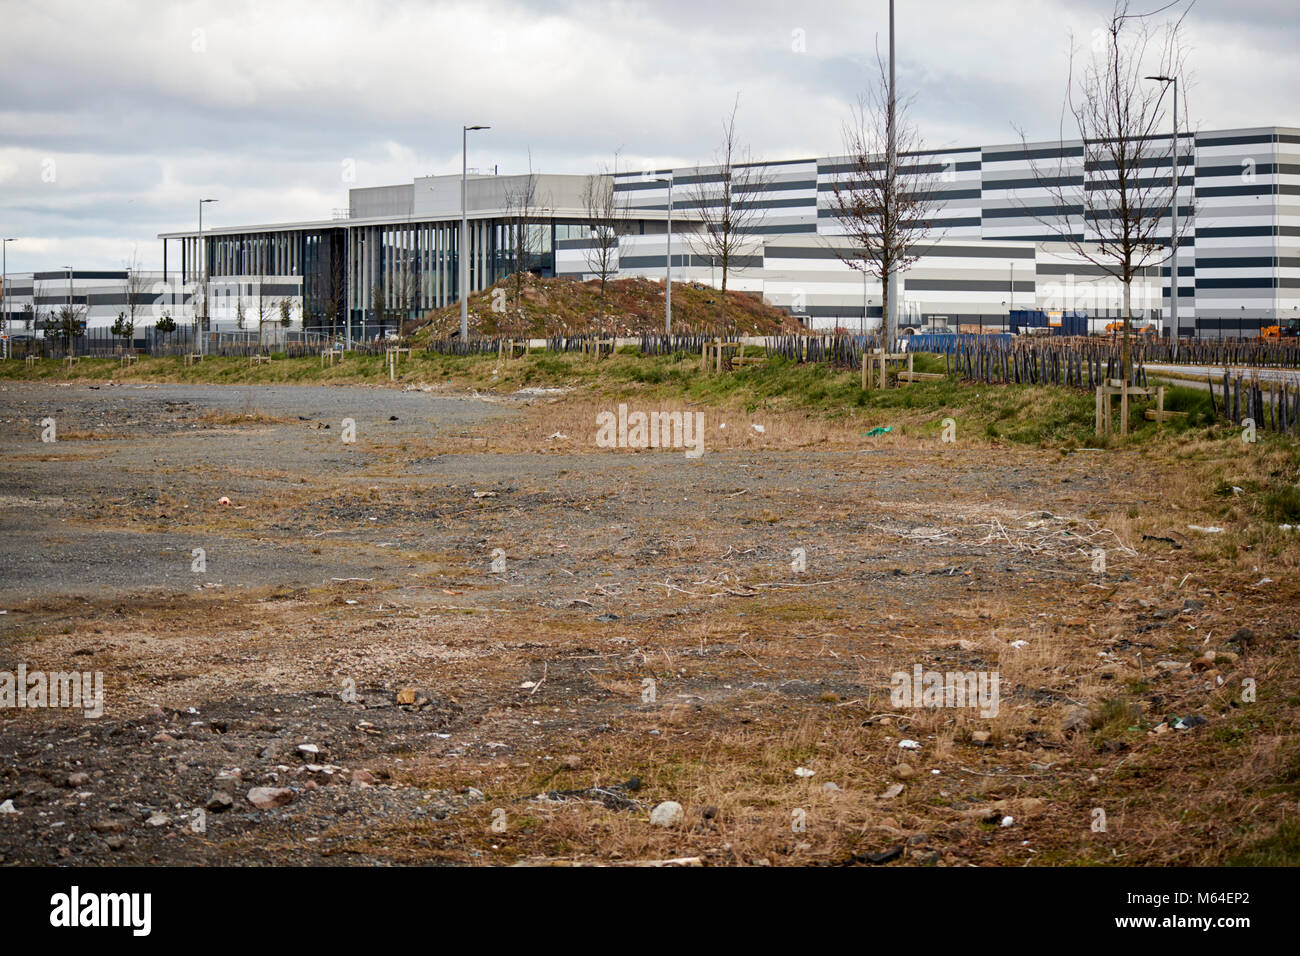 belfast harbour studios film and television studio giants park site on former landfill on reclaimed land north foreshore belfast northern ireland Stock Photo